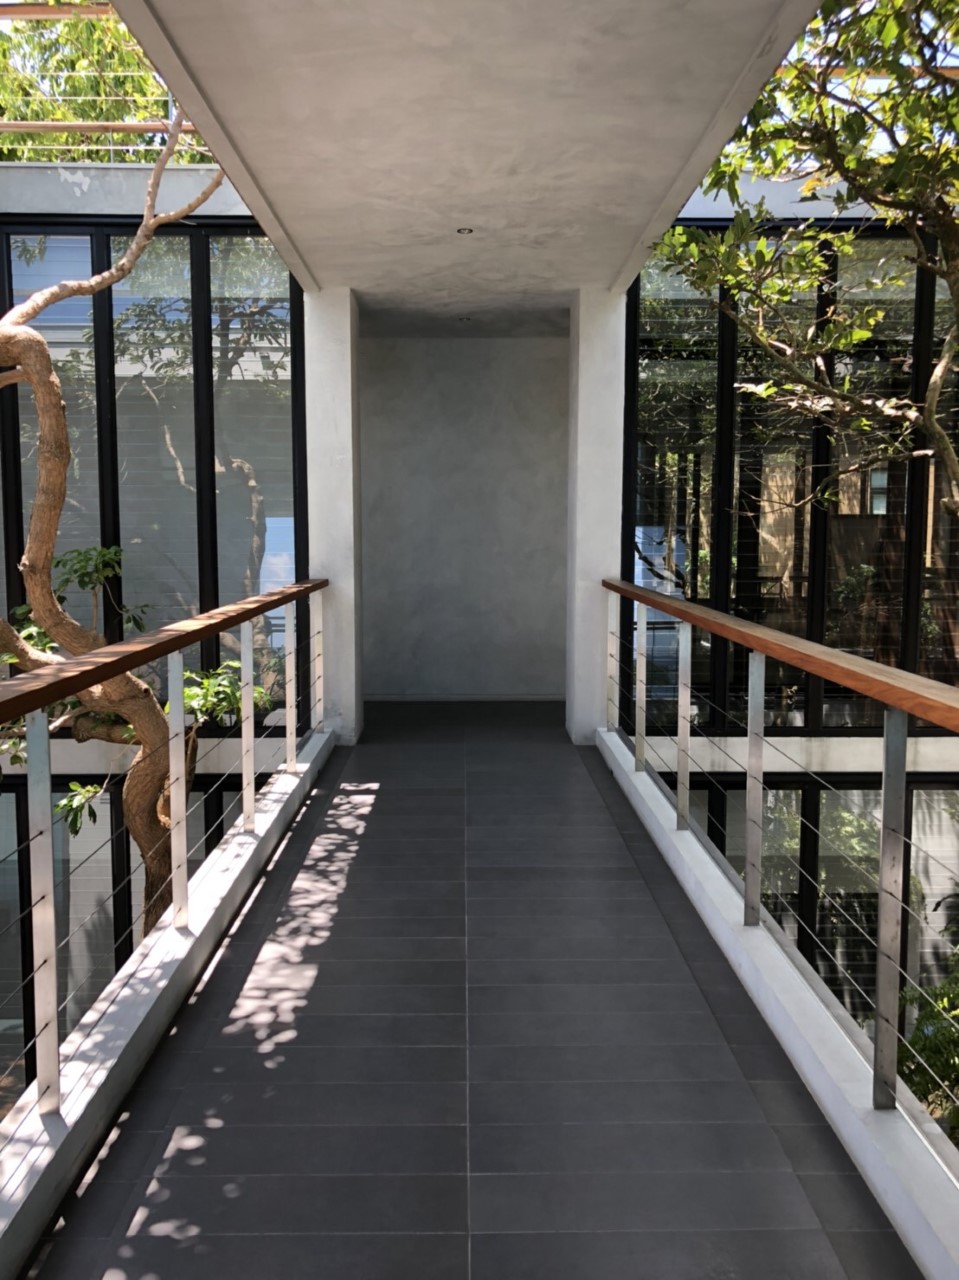 Connecting walkway between two parts of the home with Breezway Louvres either side